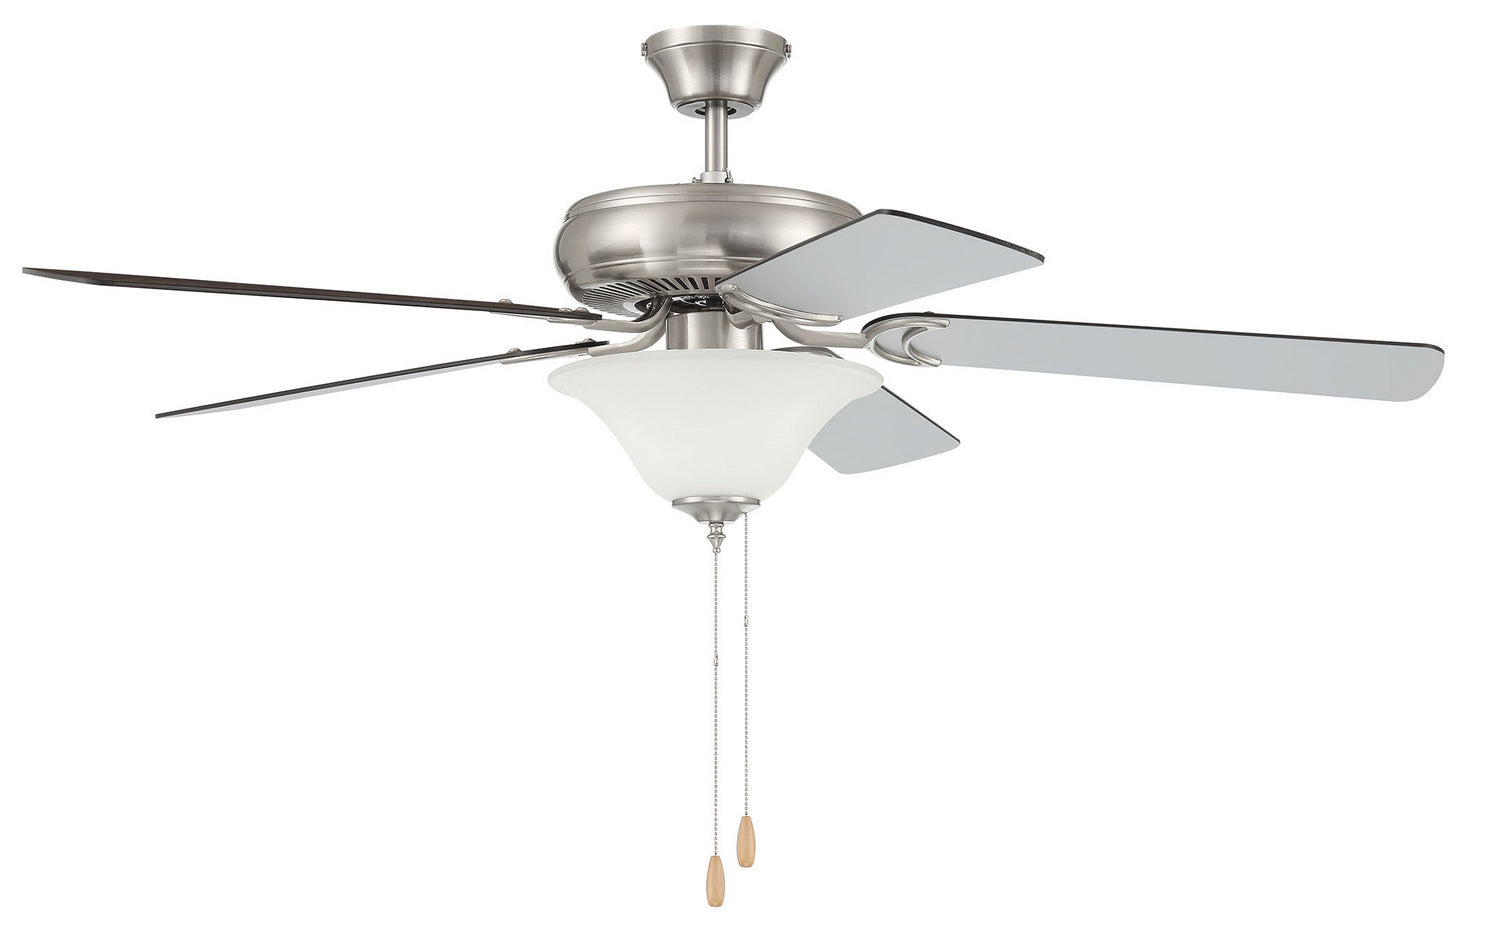 Craftmade Decorator's Choice - DCF52BNK5C1W Ceiling Fan with Light - Brushed Polished Nickel